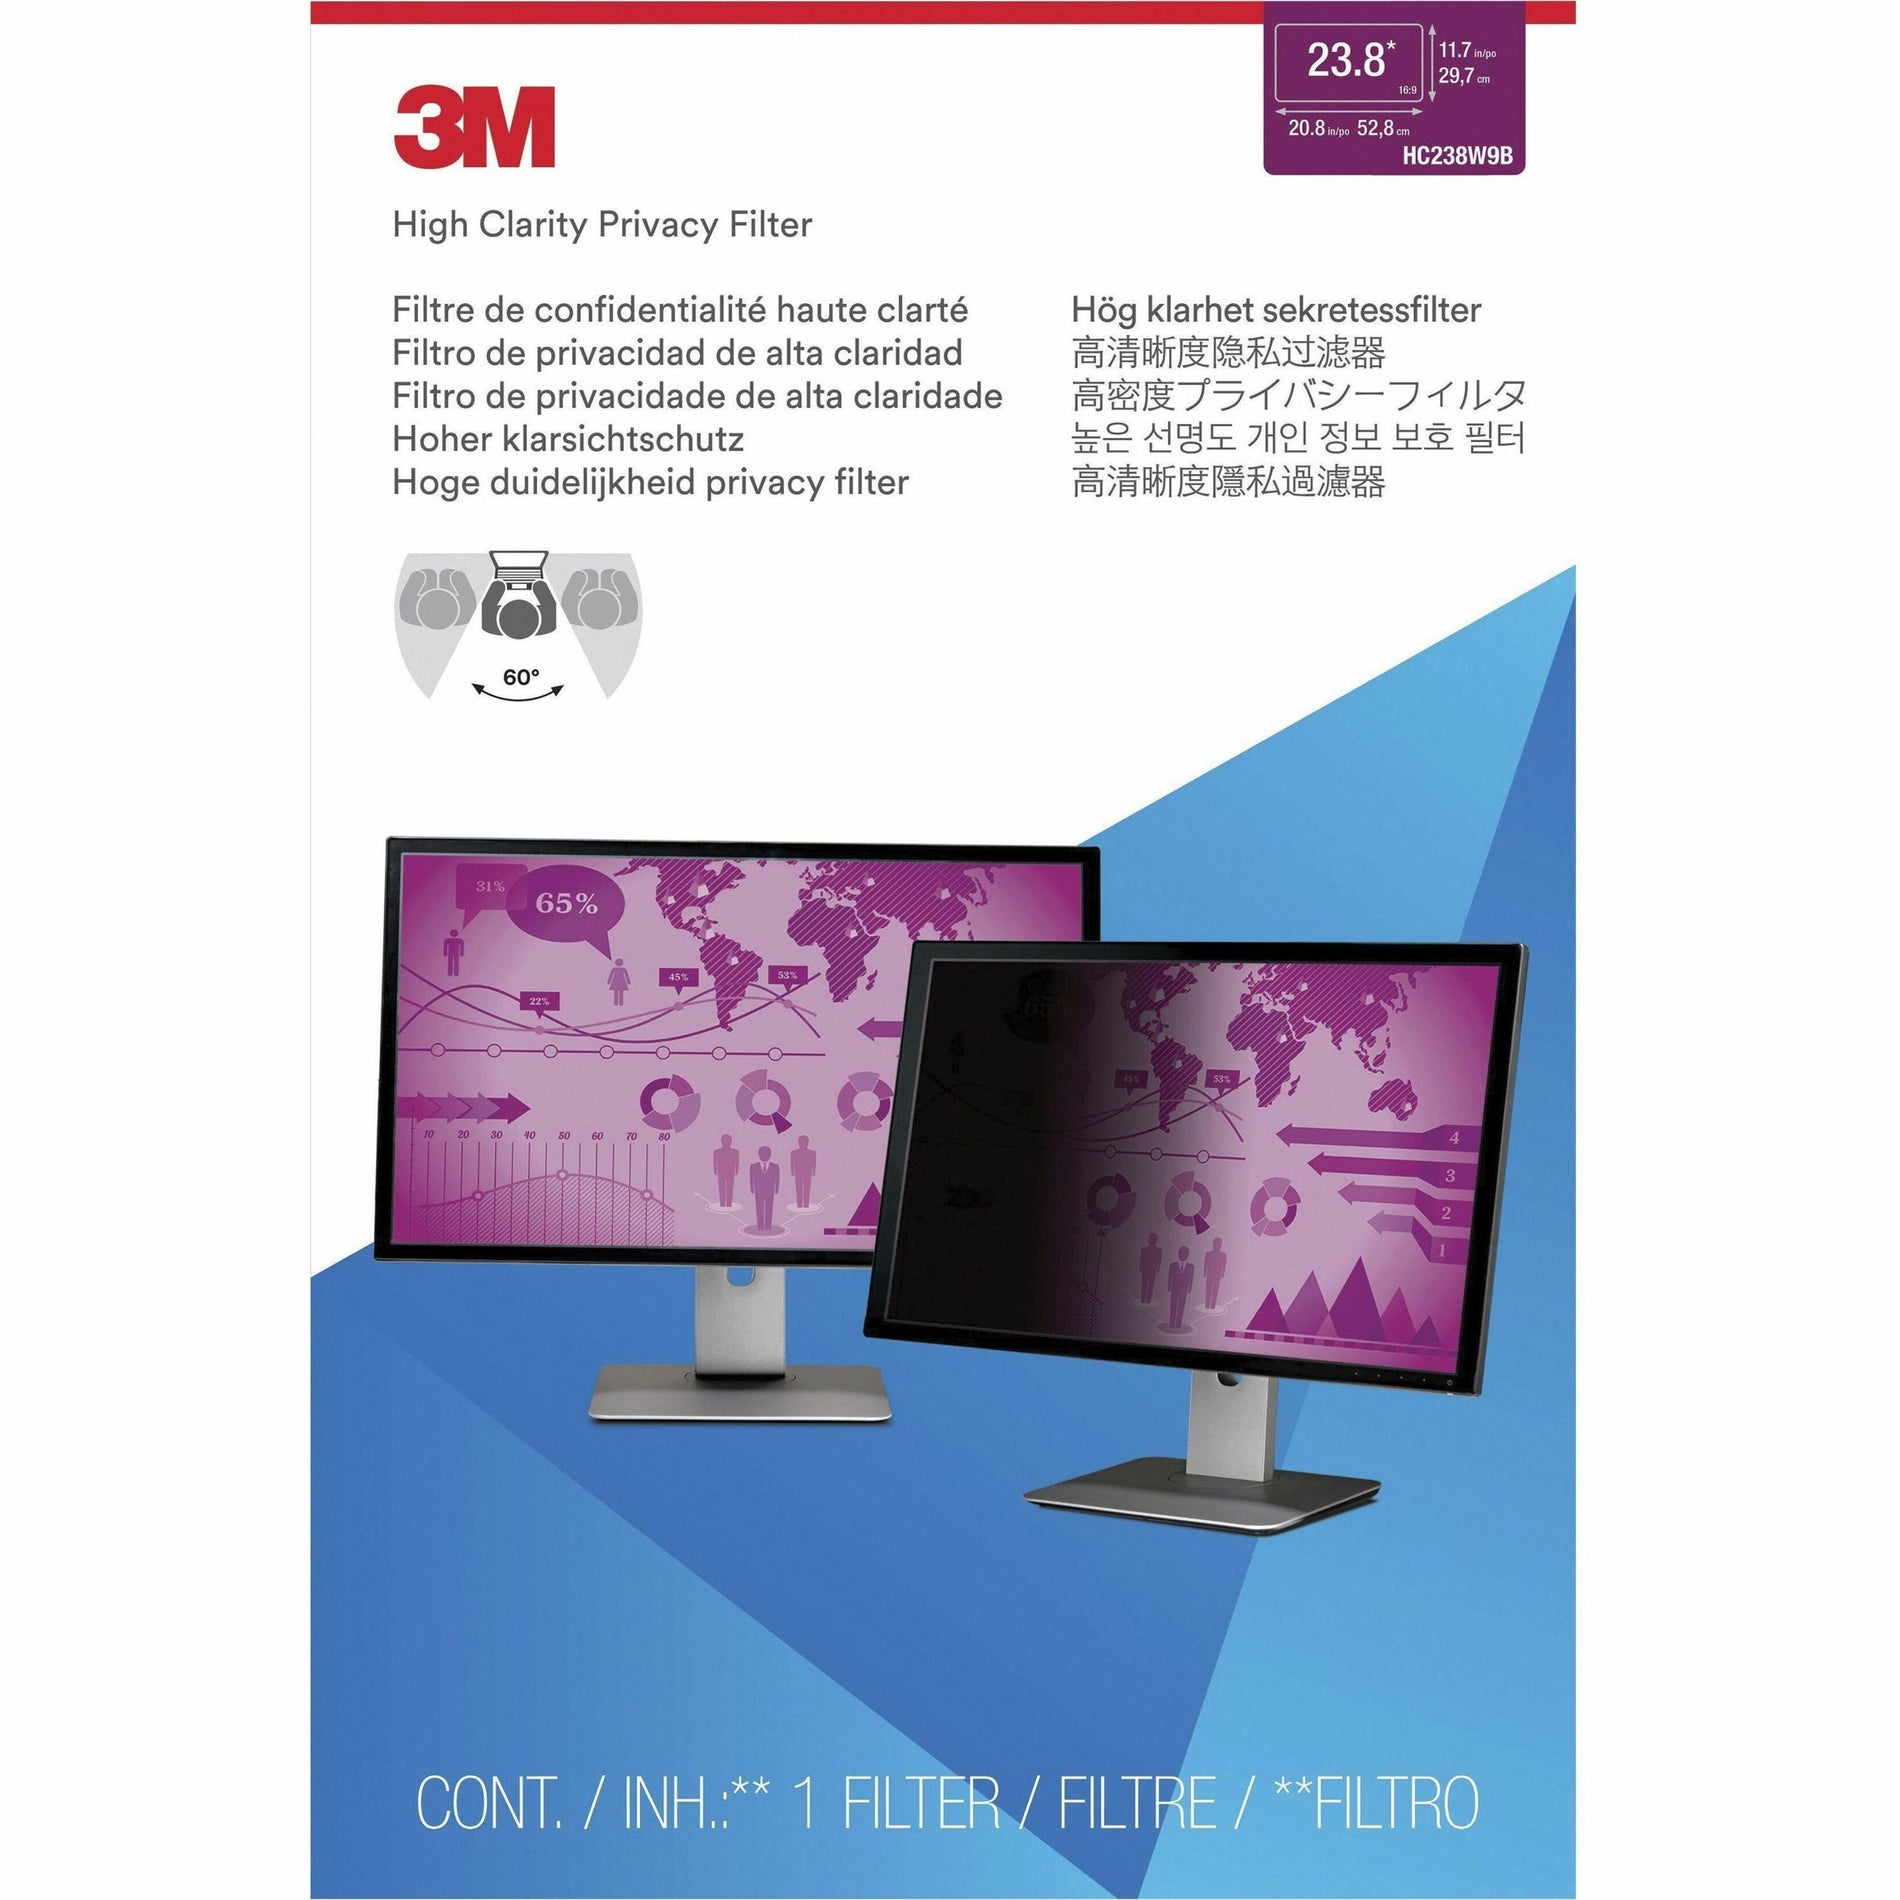 3M HC238W9B High Clarity Privacy Filter, 23.8" Widescreen Monitor, Easy to Apply, Easy to Remove, Blue Light Reduction